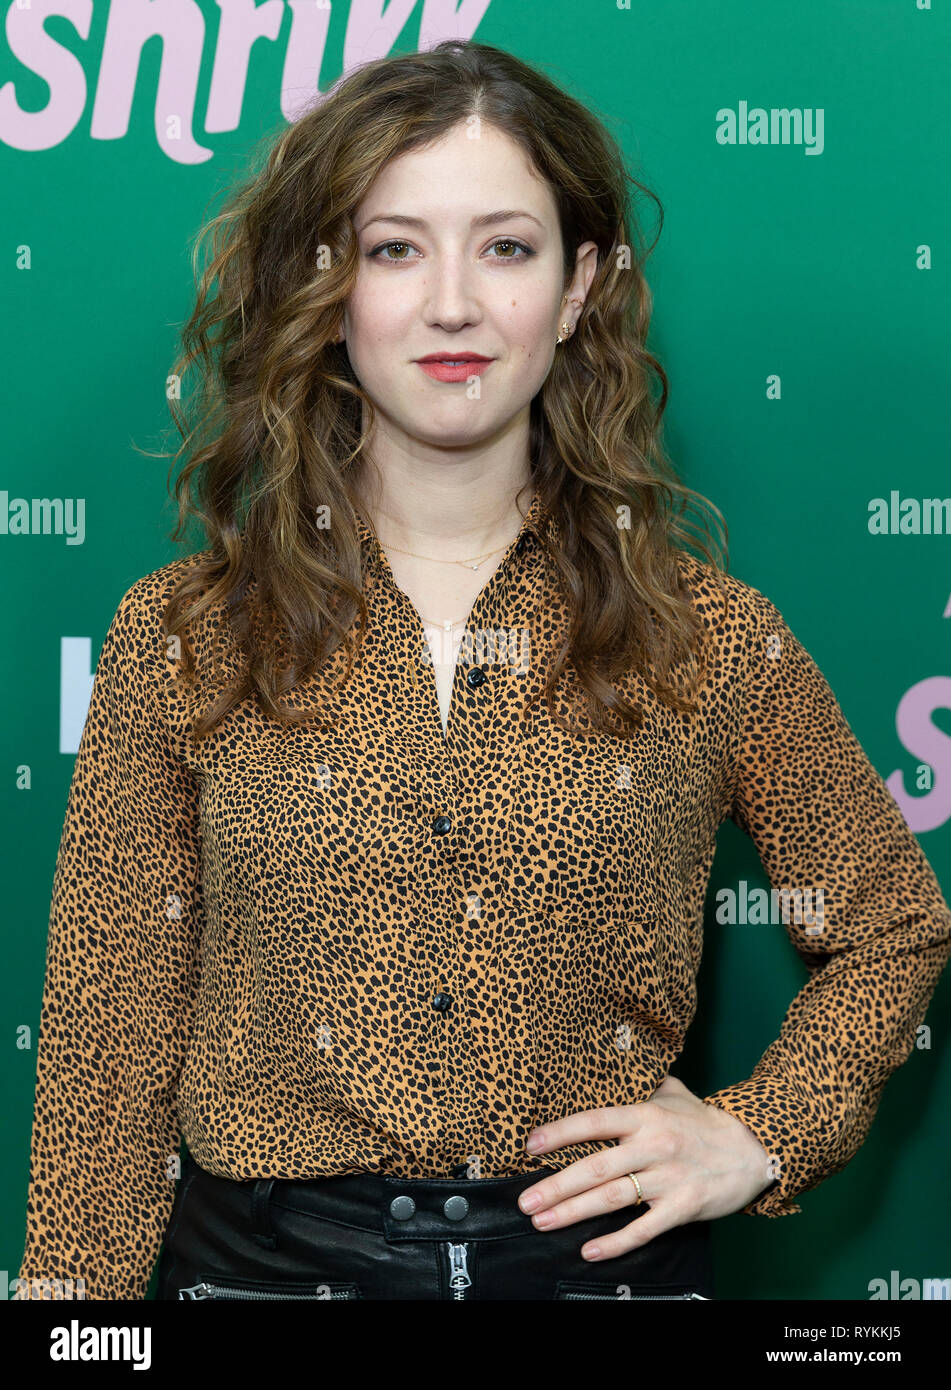 New York, United States. 13th Mar, 2019. Jessy Hodges attends New York Hulu Shrill premiere screening at Walter Reade Theater of Lincoln Center Credit: Lev Radin/Pacific Press/Alamy Live News Stock Photo